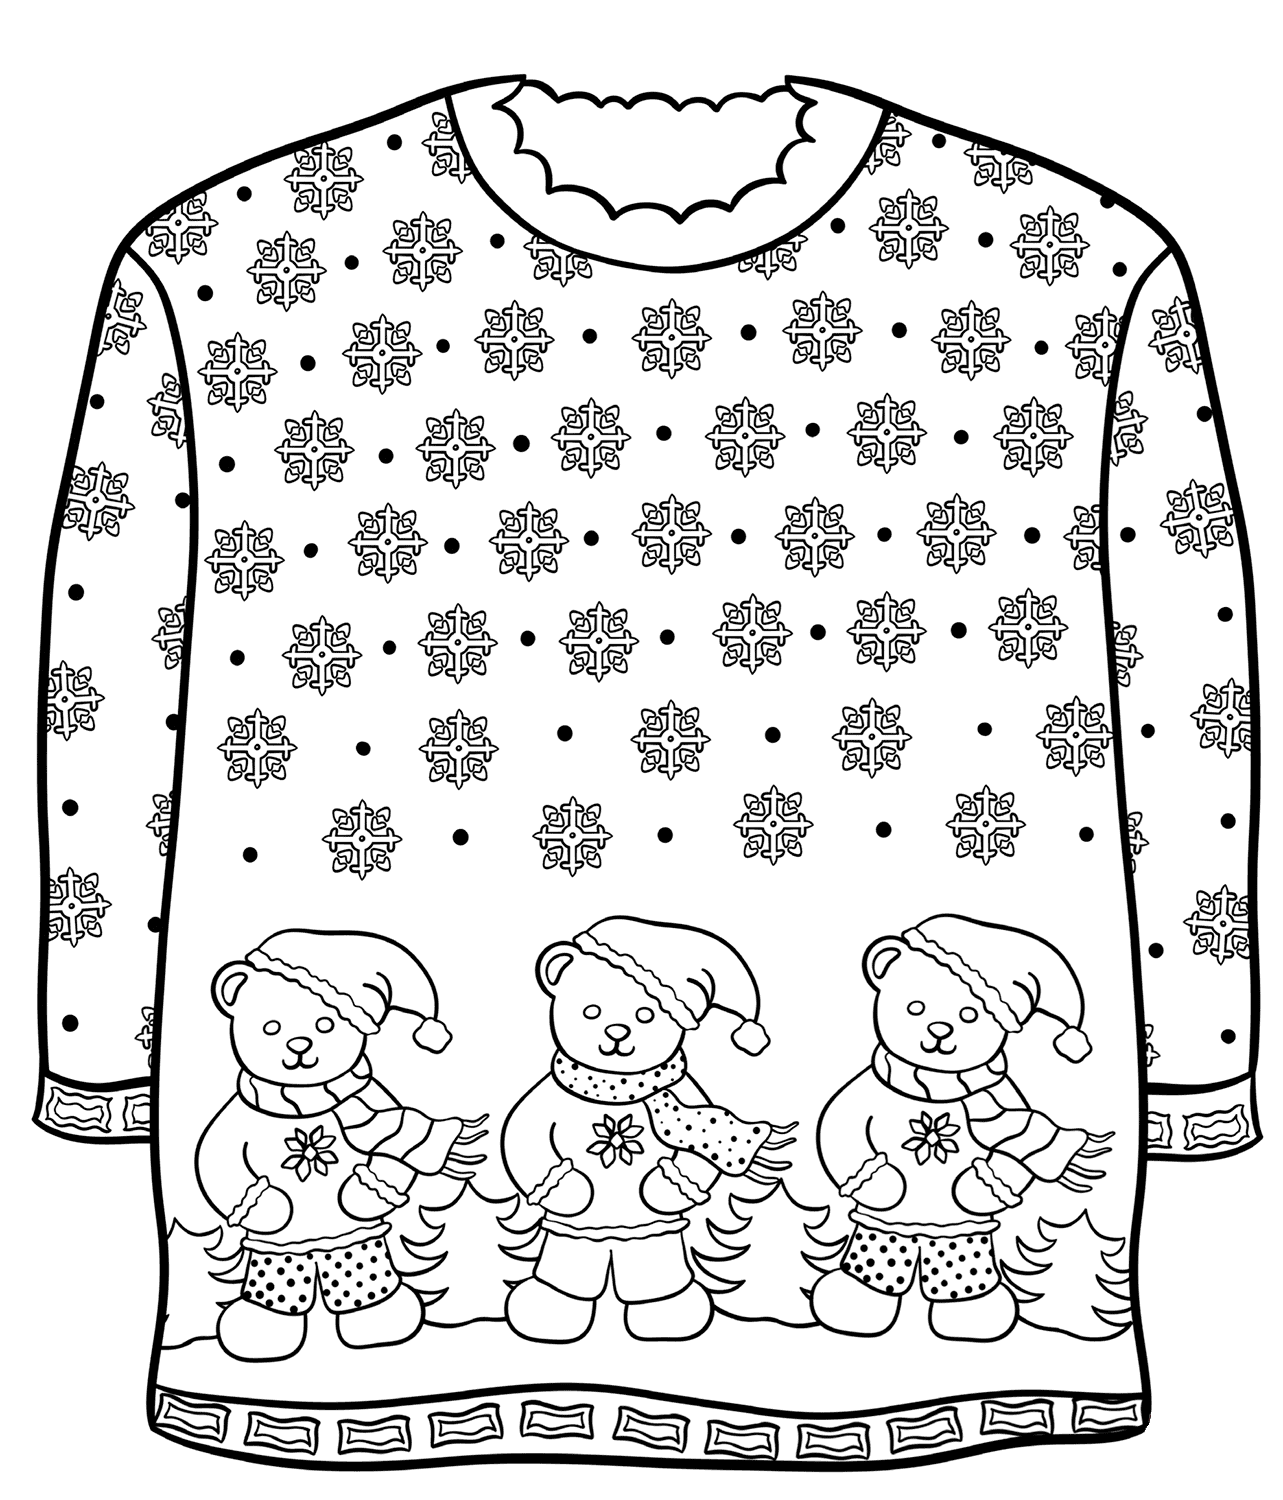 Christmas Sweater with Teddy Bears Coloring Page